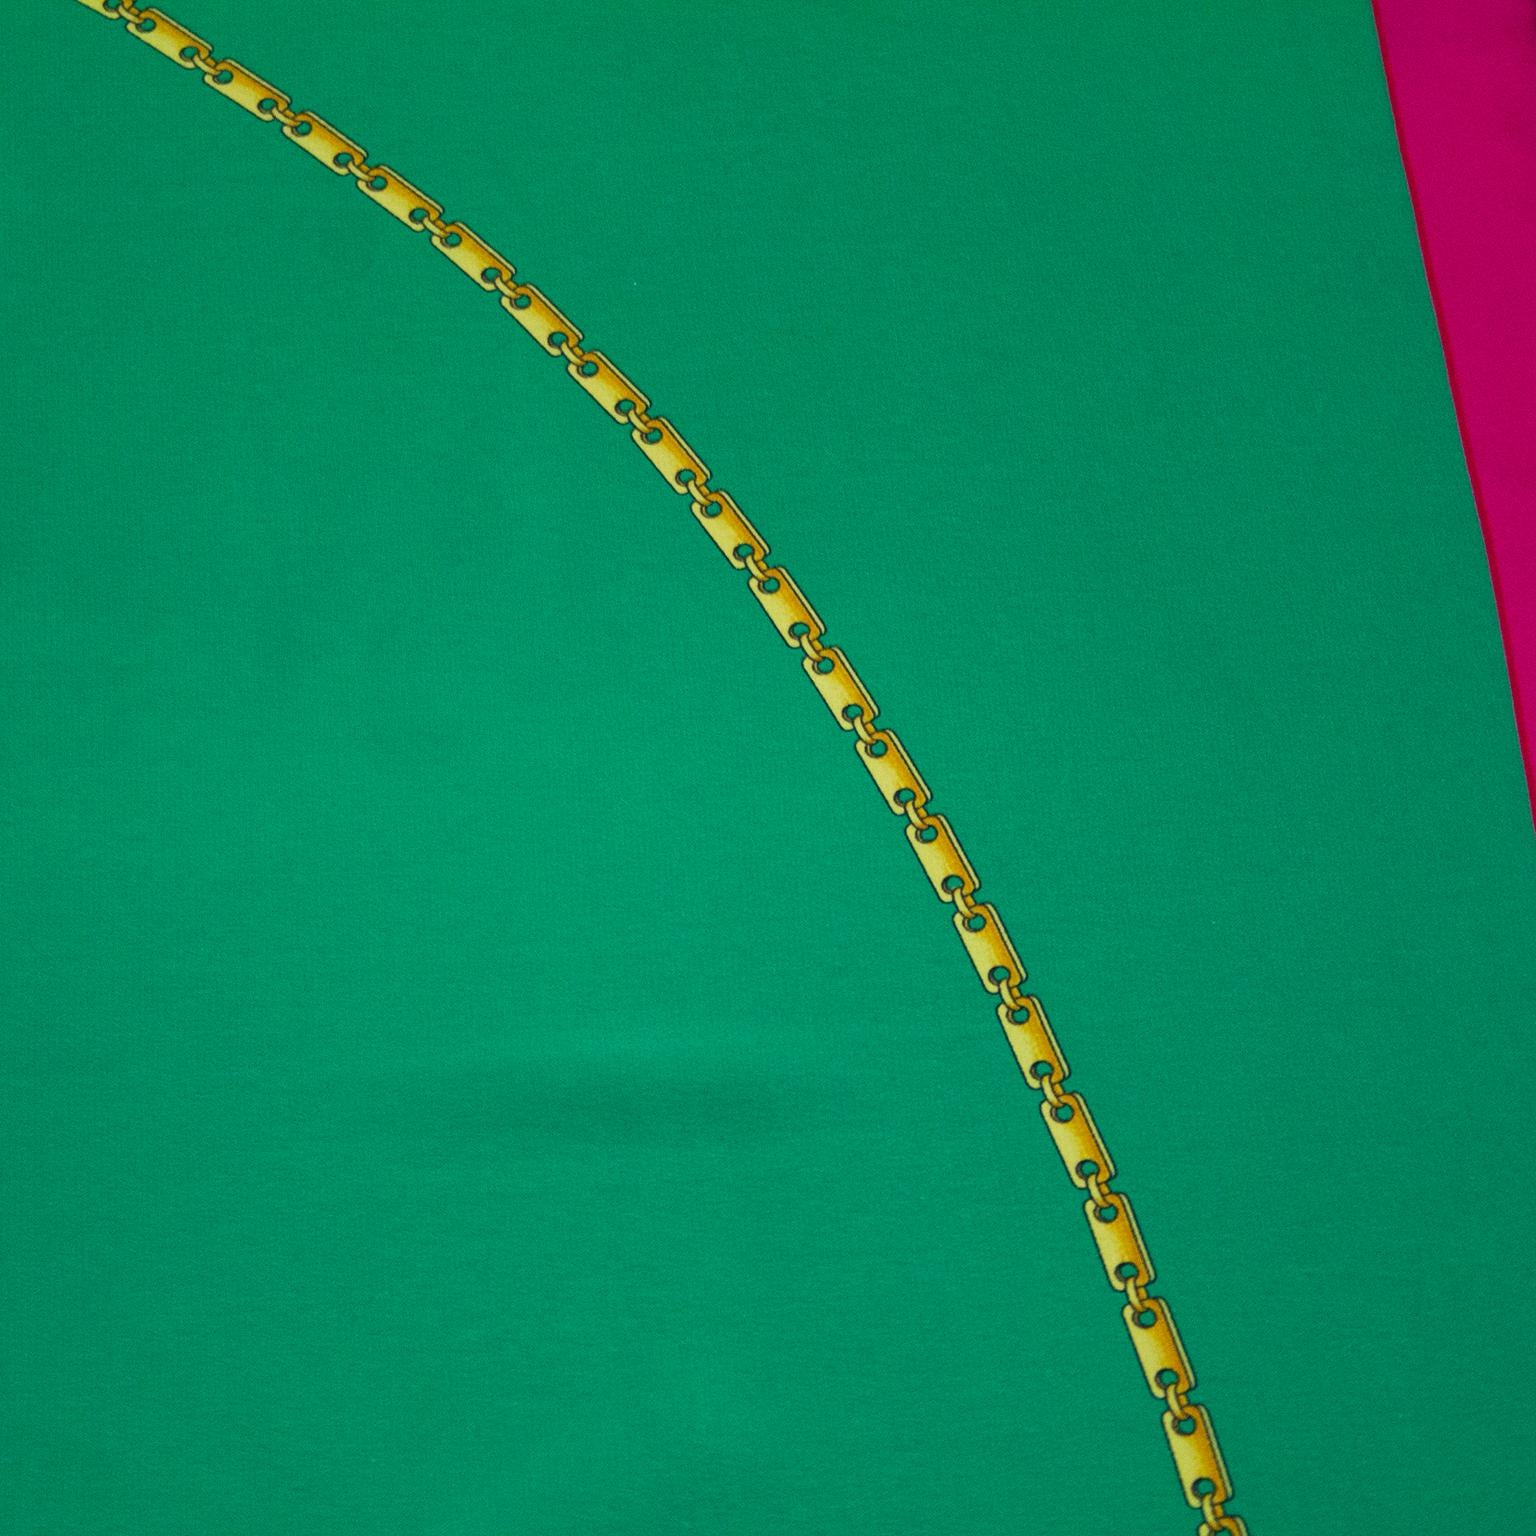 Square Cartier silk scarf from the early 2000's. Green with magenta pink boarder and Cartier logo. Gold link jewllery detail. Cartier markings. Hand sewn rolled hem. Excellent vintage condition. 32